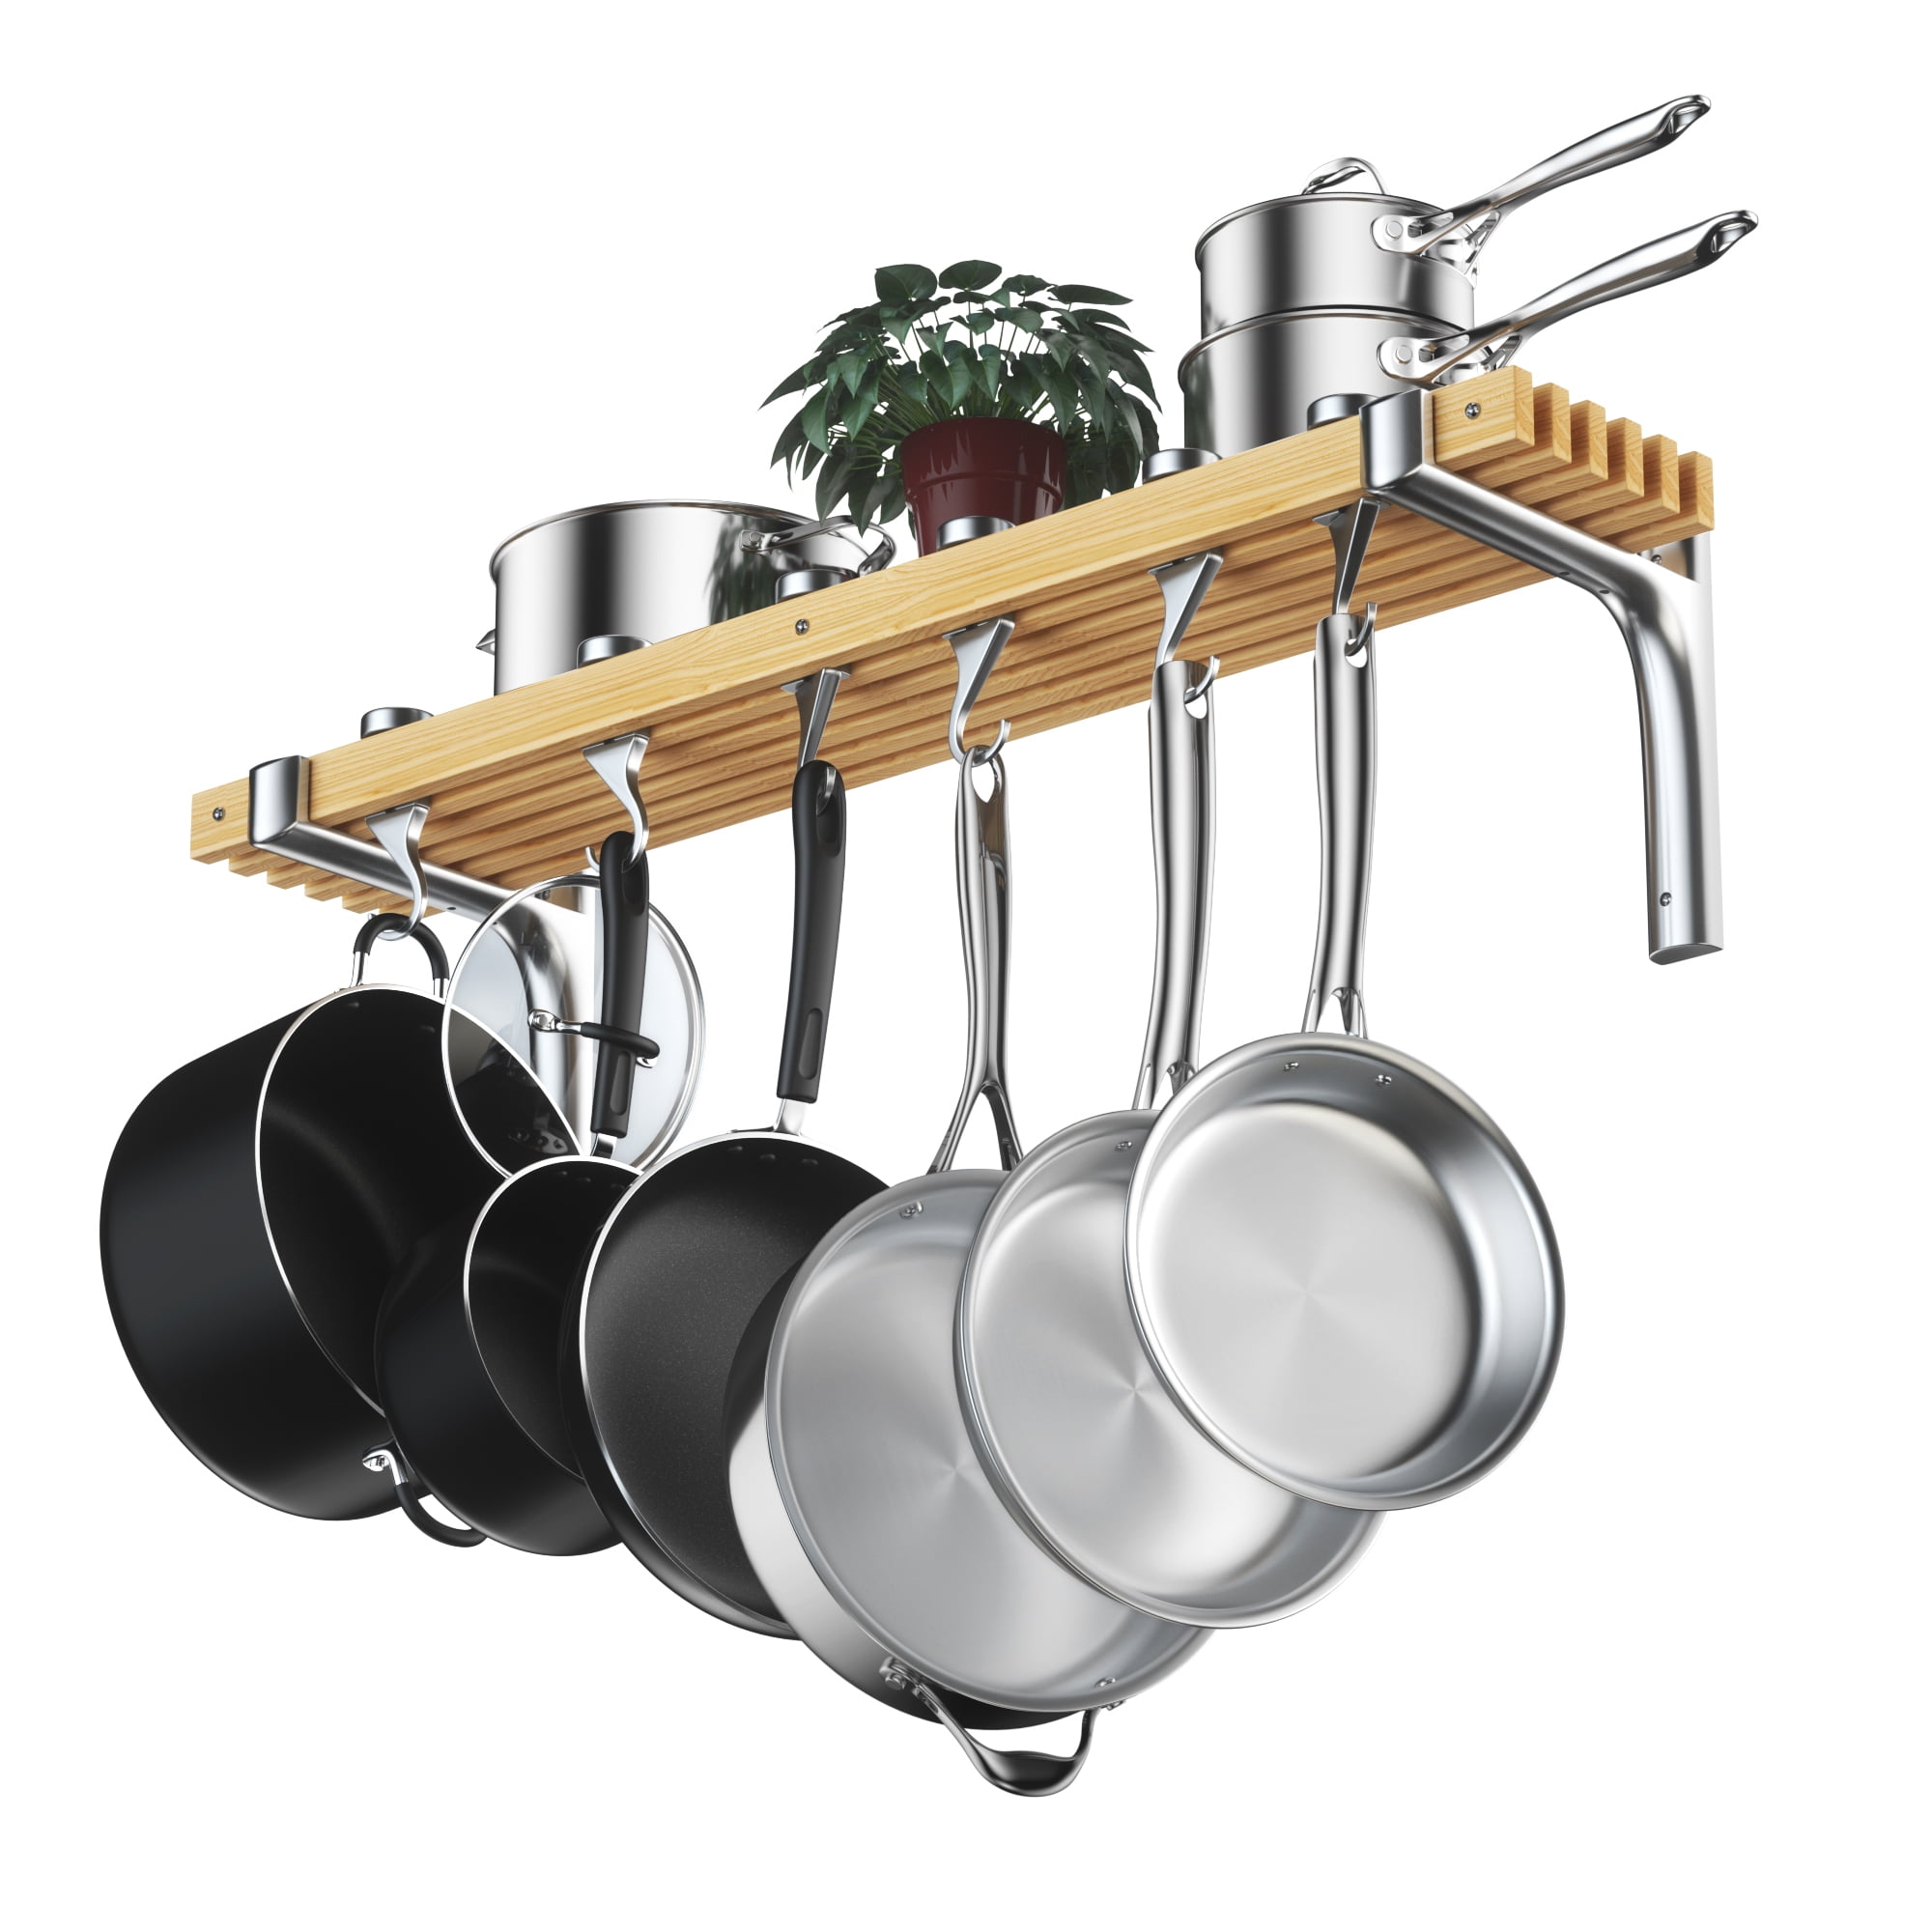 VEVOR Pot Rack Wall Mounted 24 inch Pot and Pan Hanging Rack Pot and Pan Hanger with 12 S Hooks 55 lbs Loading Weight Ideal for Pans Utensils